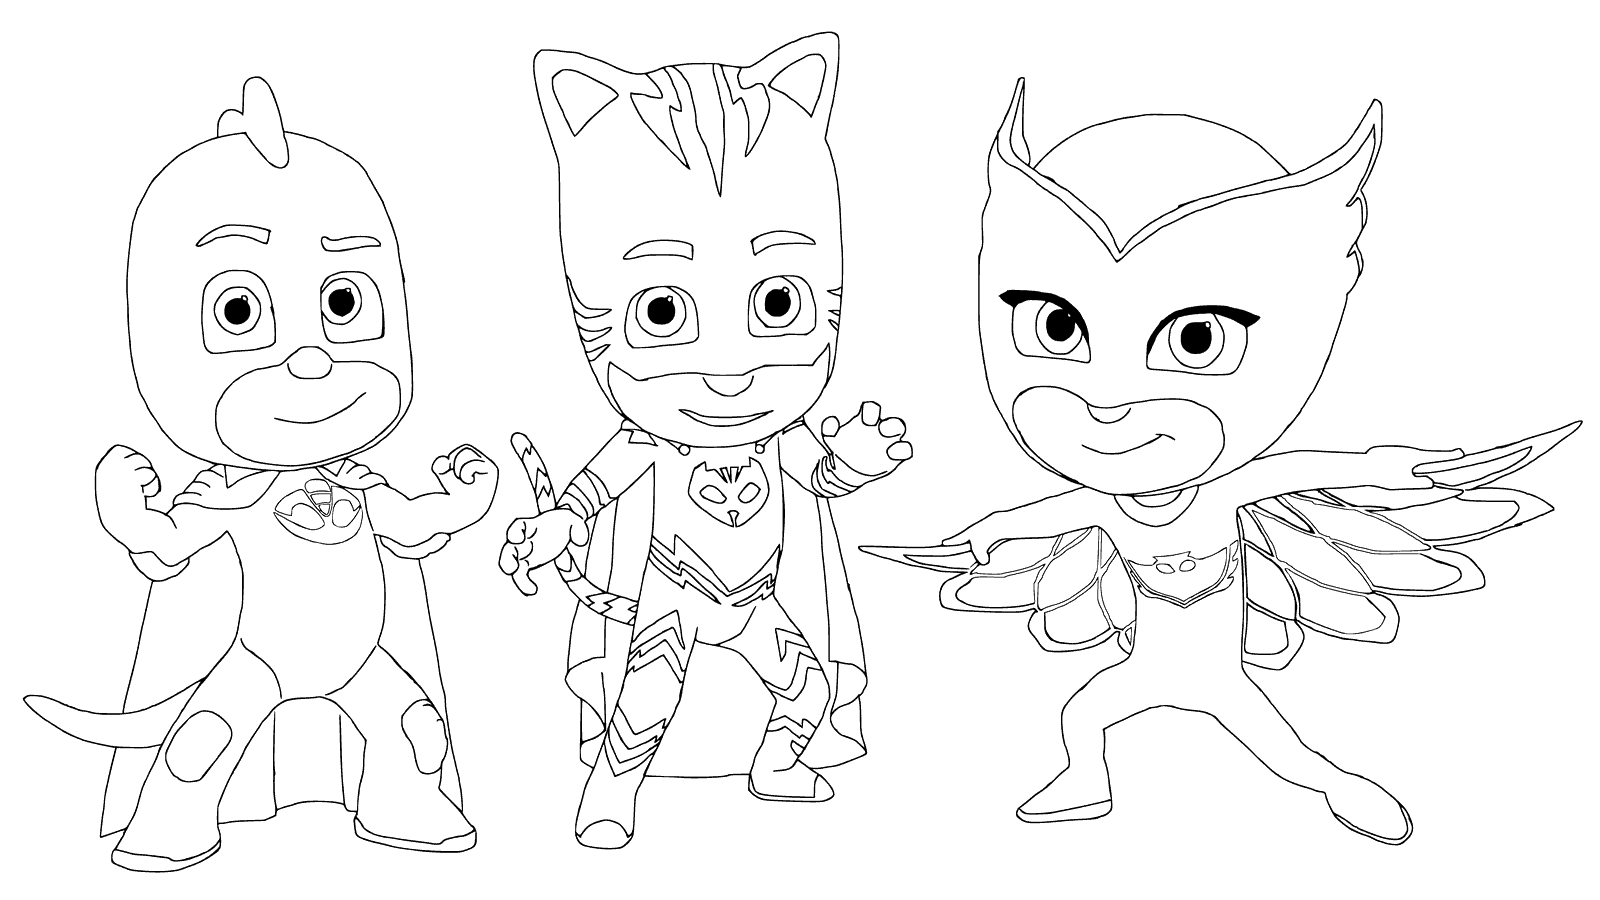 PJ Masks With Friends Coloring Page